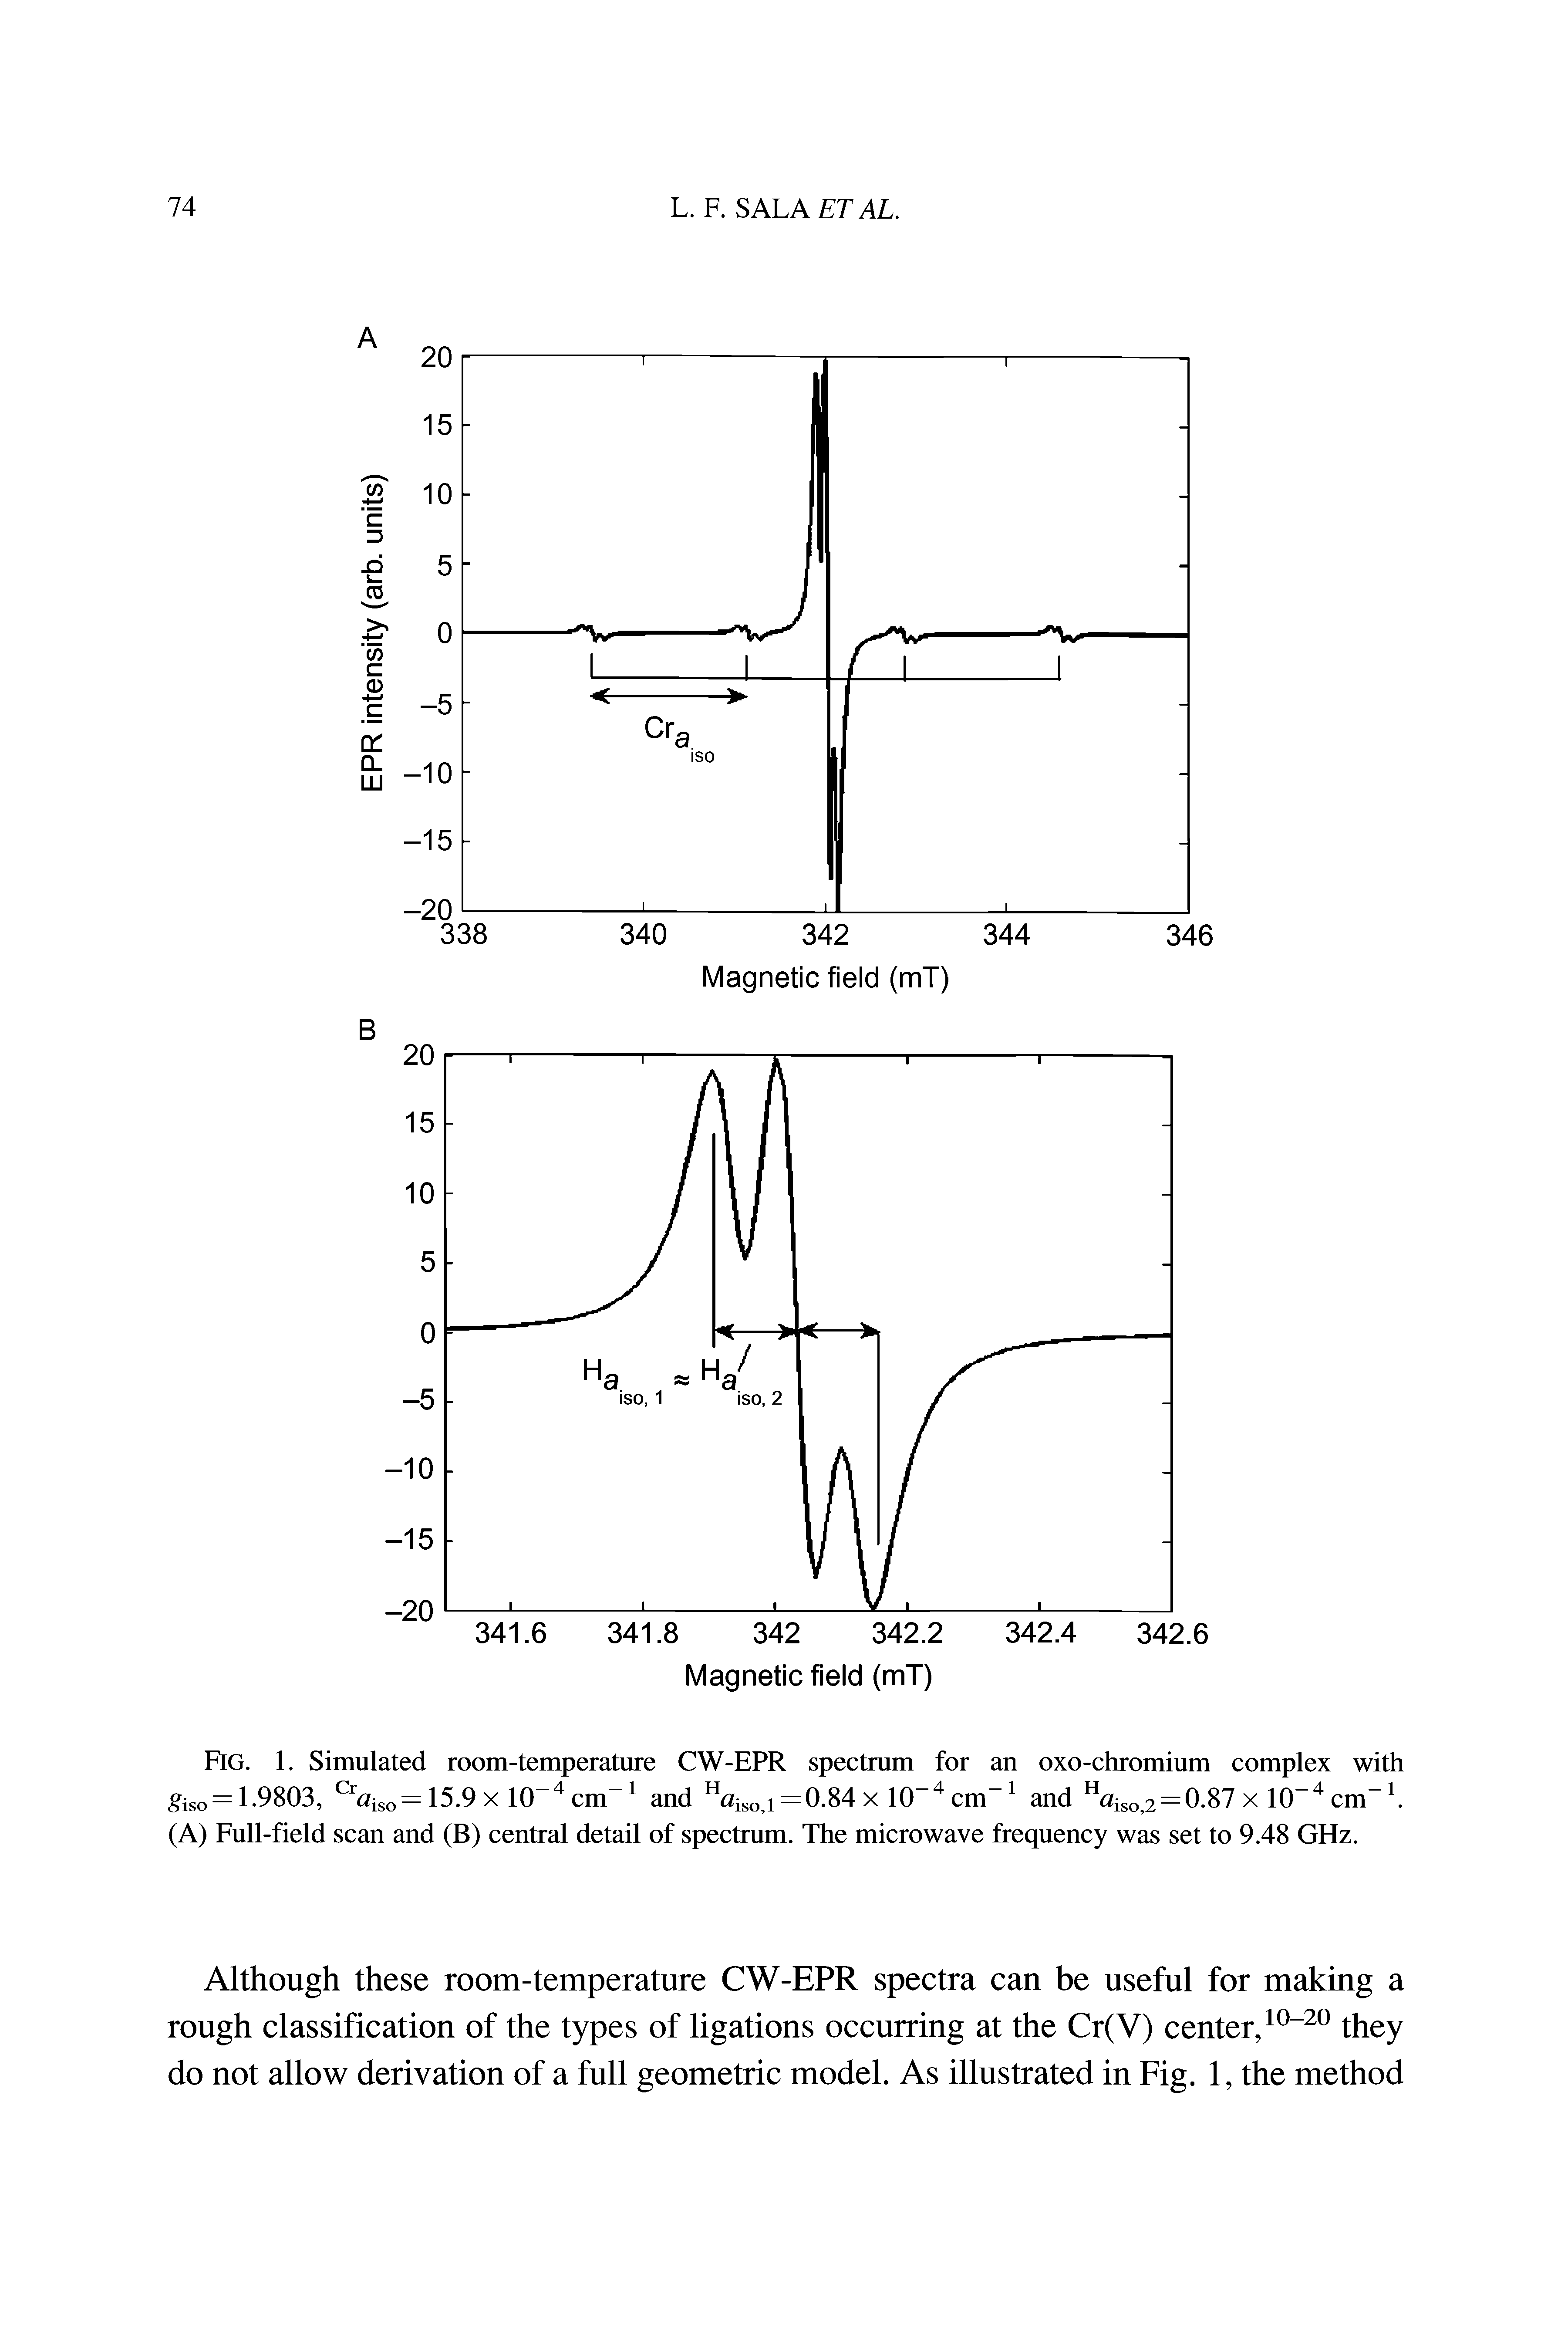 Fig. 1. Simulated room-temperature CW-EPR spectrum for an oxo-chromium complex with giso = 1.9803, Craiso= 15.9 x 10-4 cm-1 and H iso,i = 0.84 x 10-4 cm-1 and H<2iso,2 = 0.87 x 10-4 cm-1. (A) Full-field scan and (B) central detail of spectrum. The microwave frequency was set to 9.48 GHz.